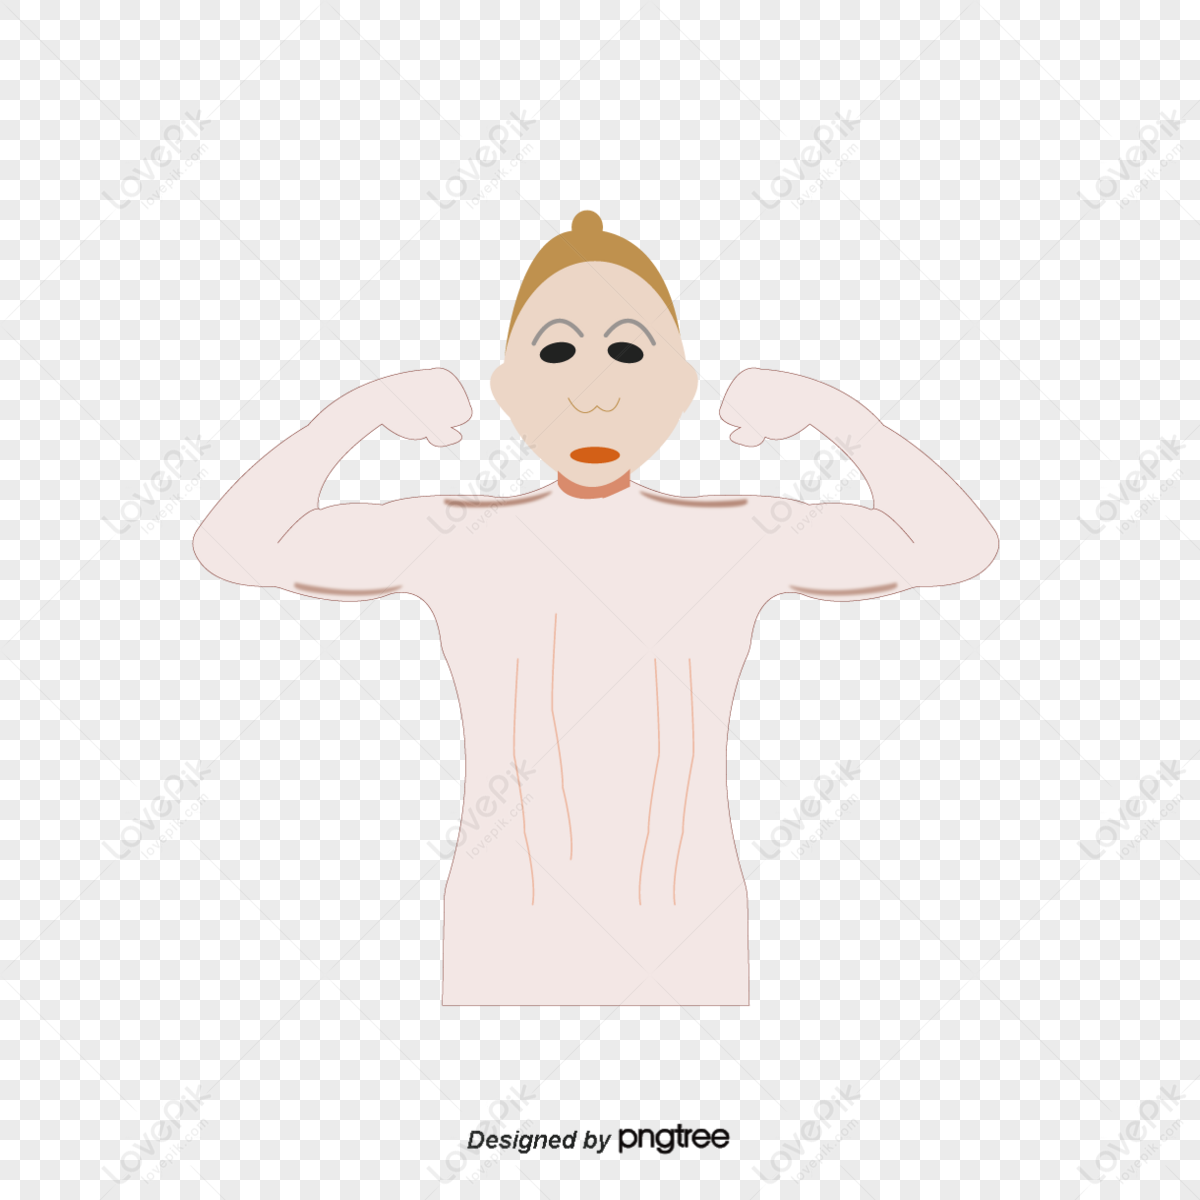 Strong Woman PNG Images With Transparent Background